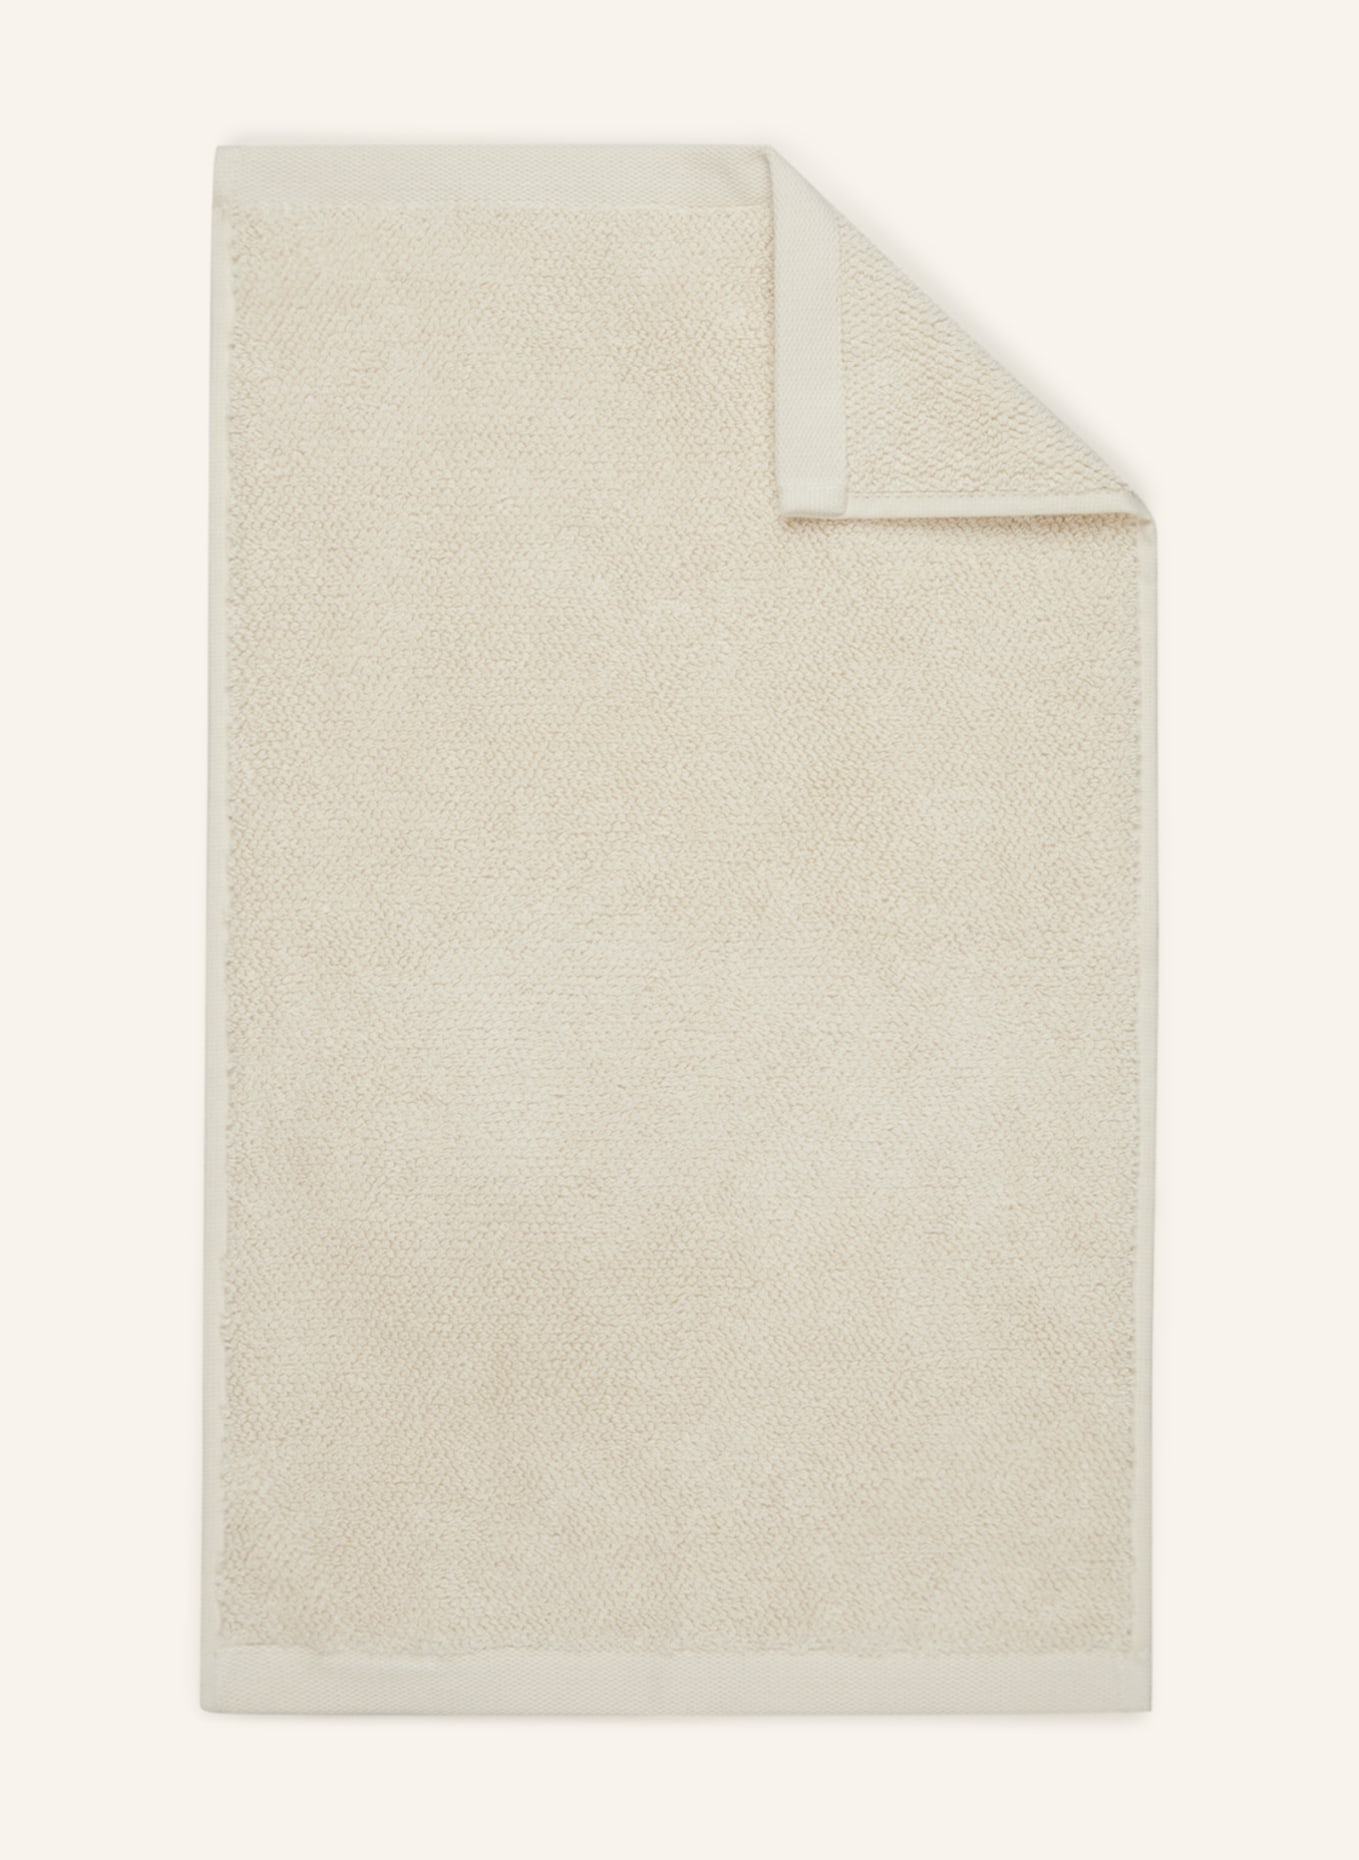 Marc O'Polo Guest towel TIMELESS, Color: CREAM (Image 1)